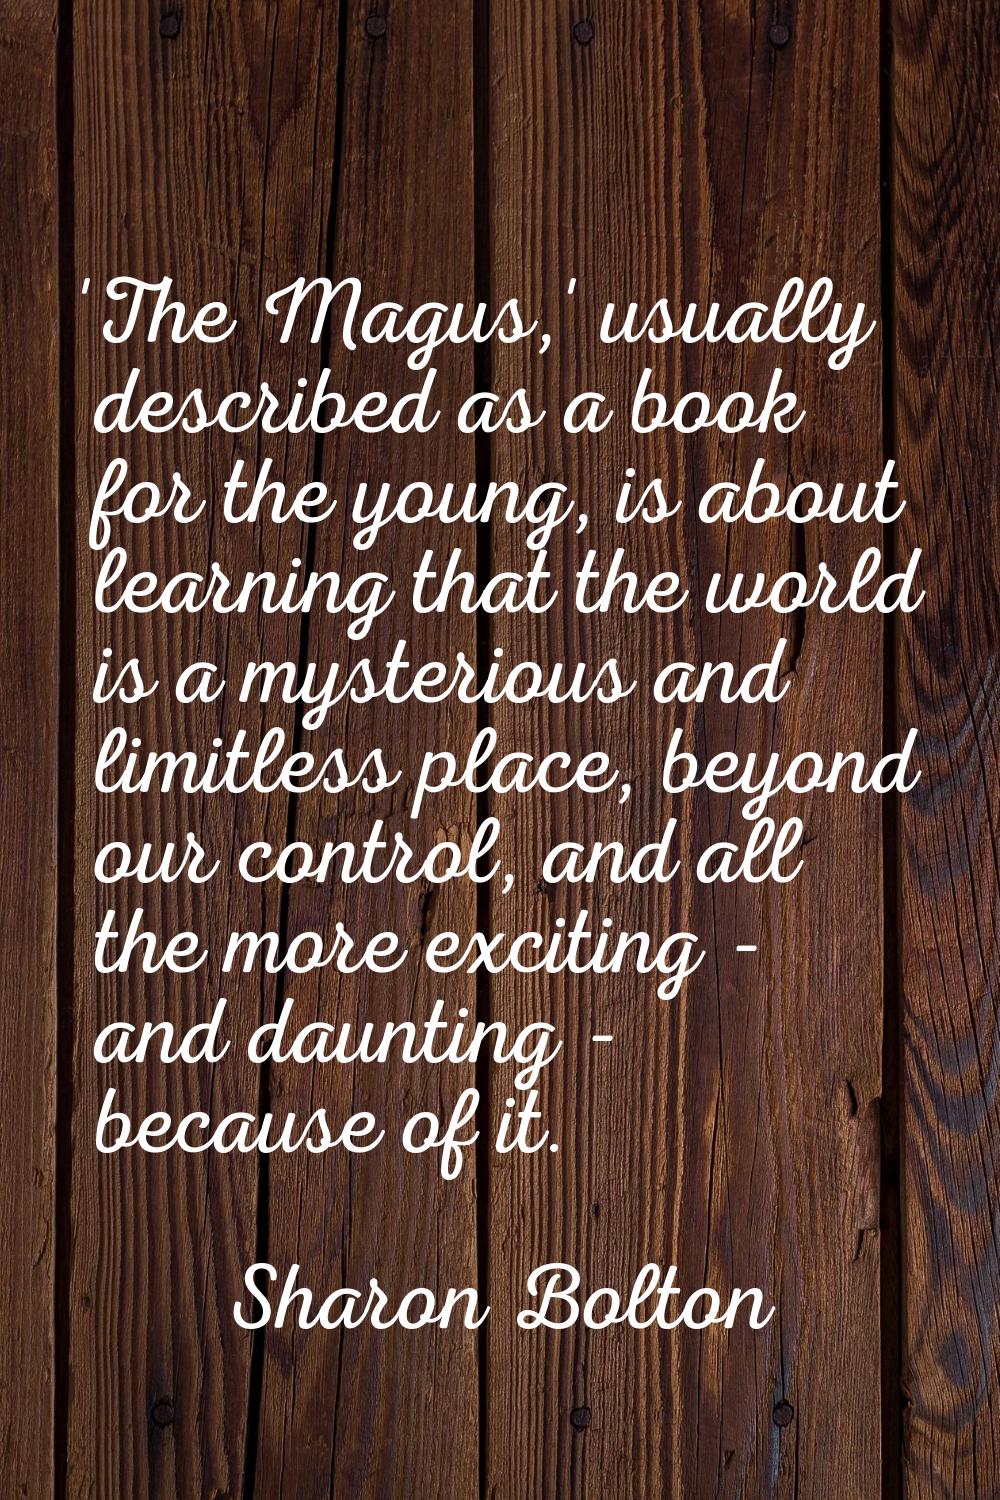 'The Magus,' usually described as a book for the young, is about learning that the world is a myste